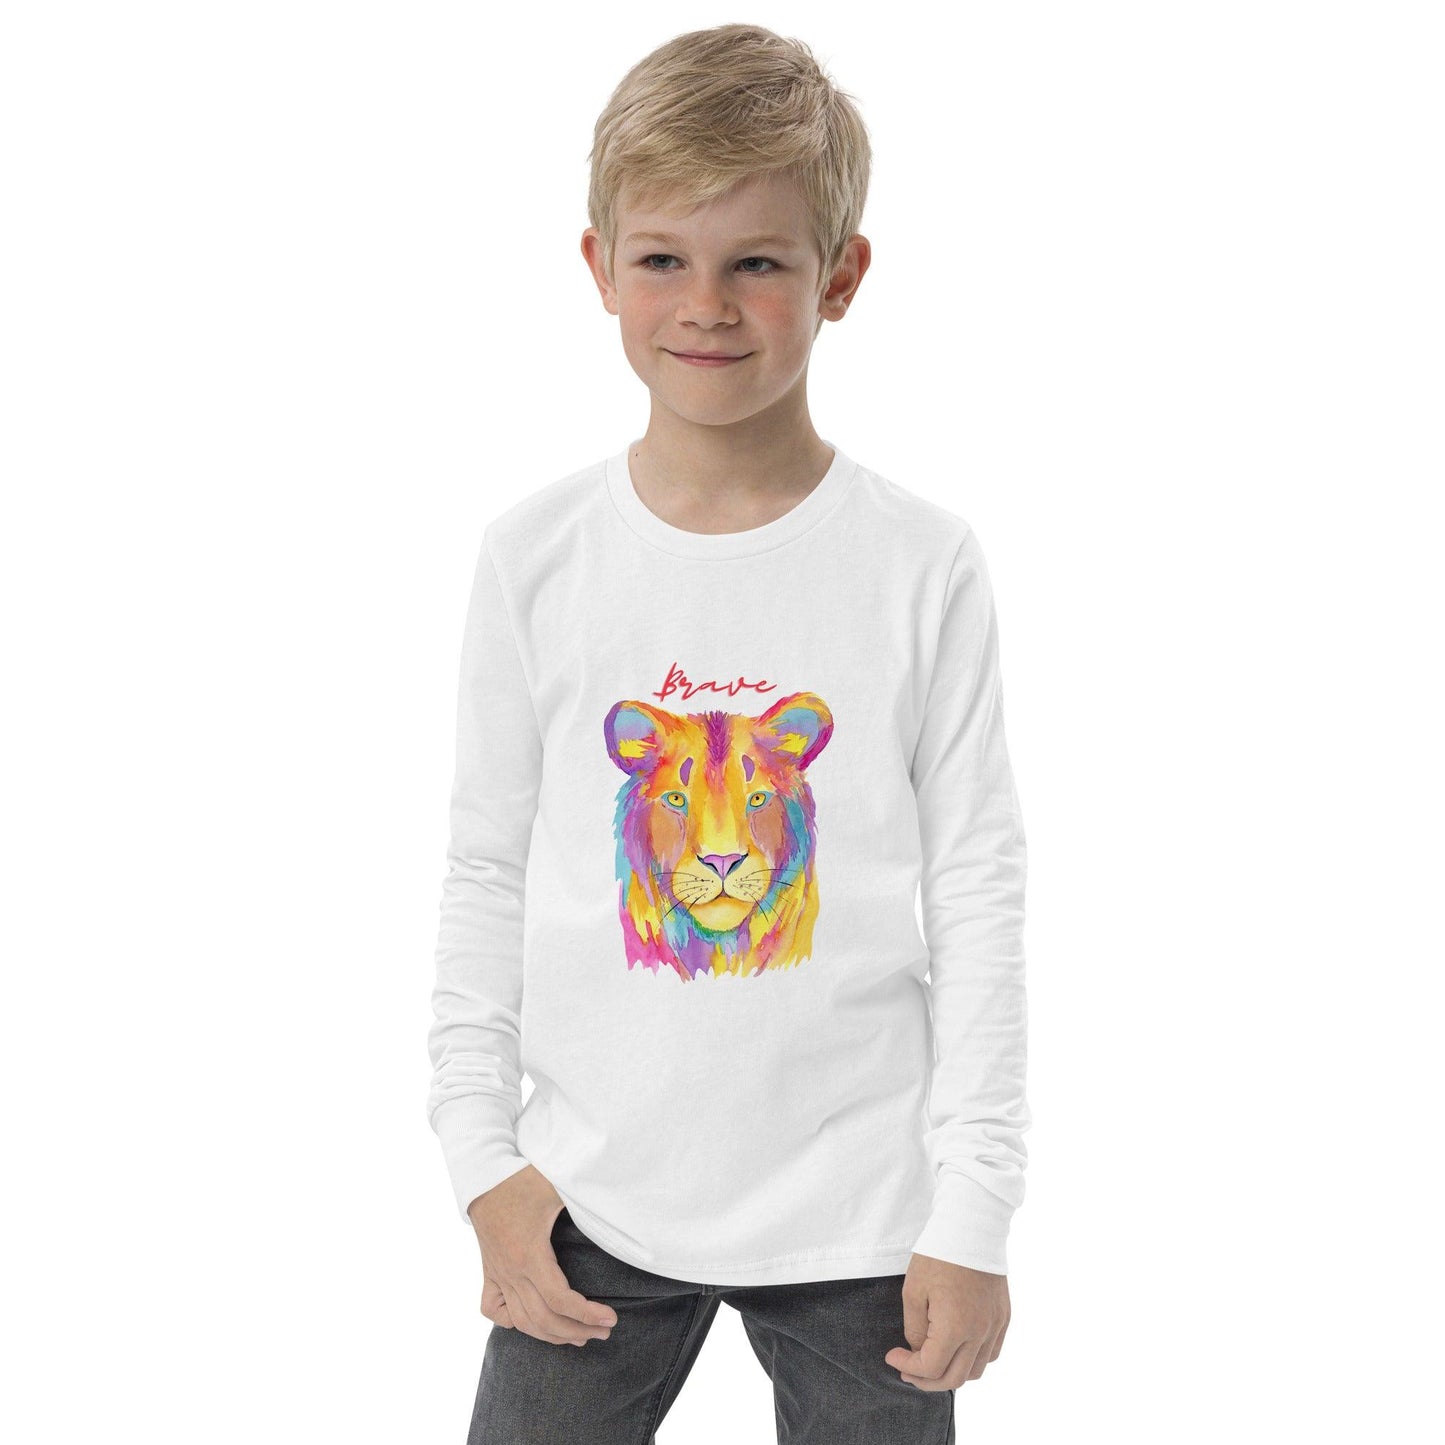 Brave Like A Lion Youth long sleeve tee - Affirm Effect